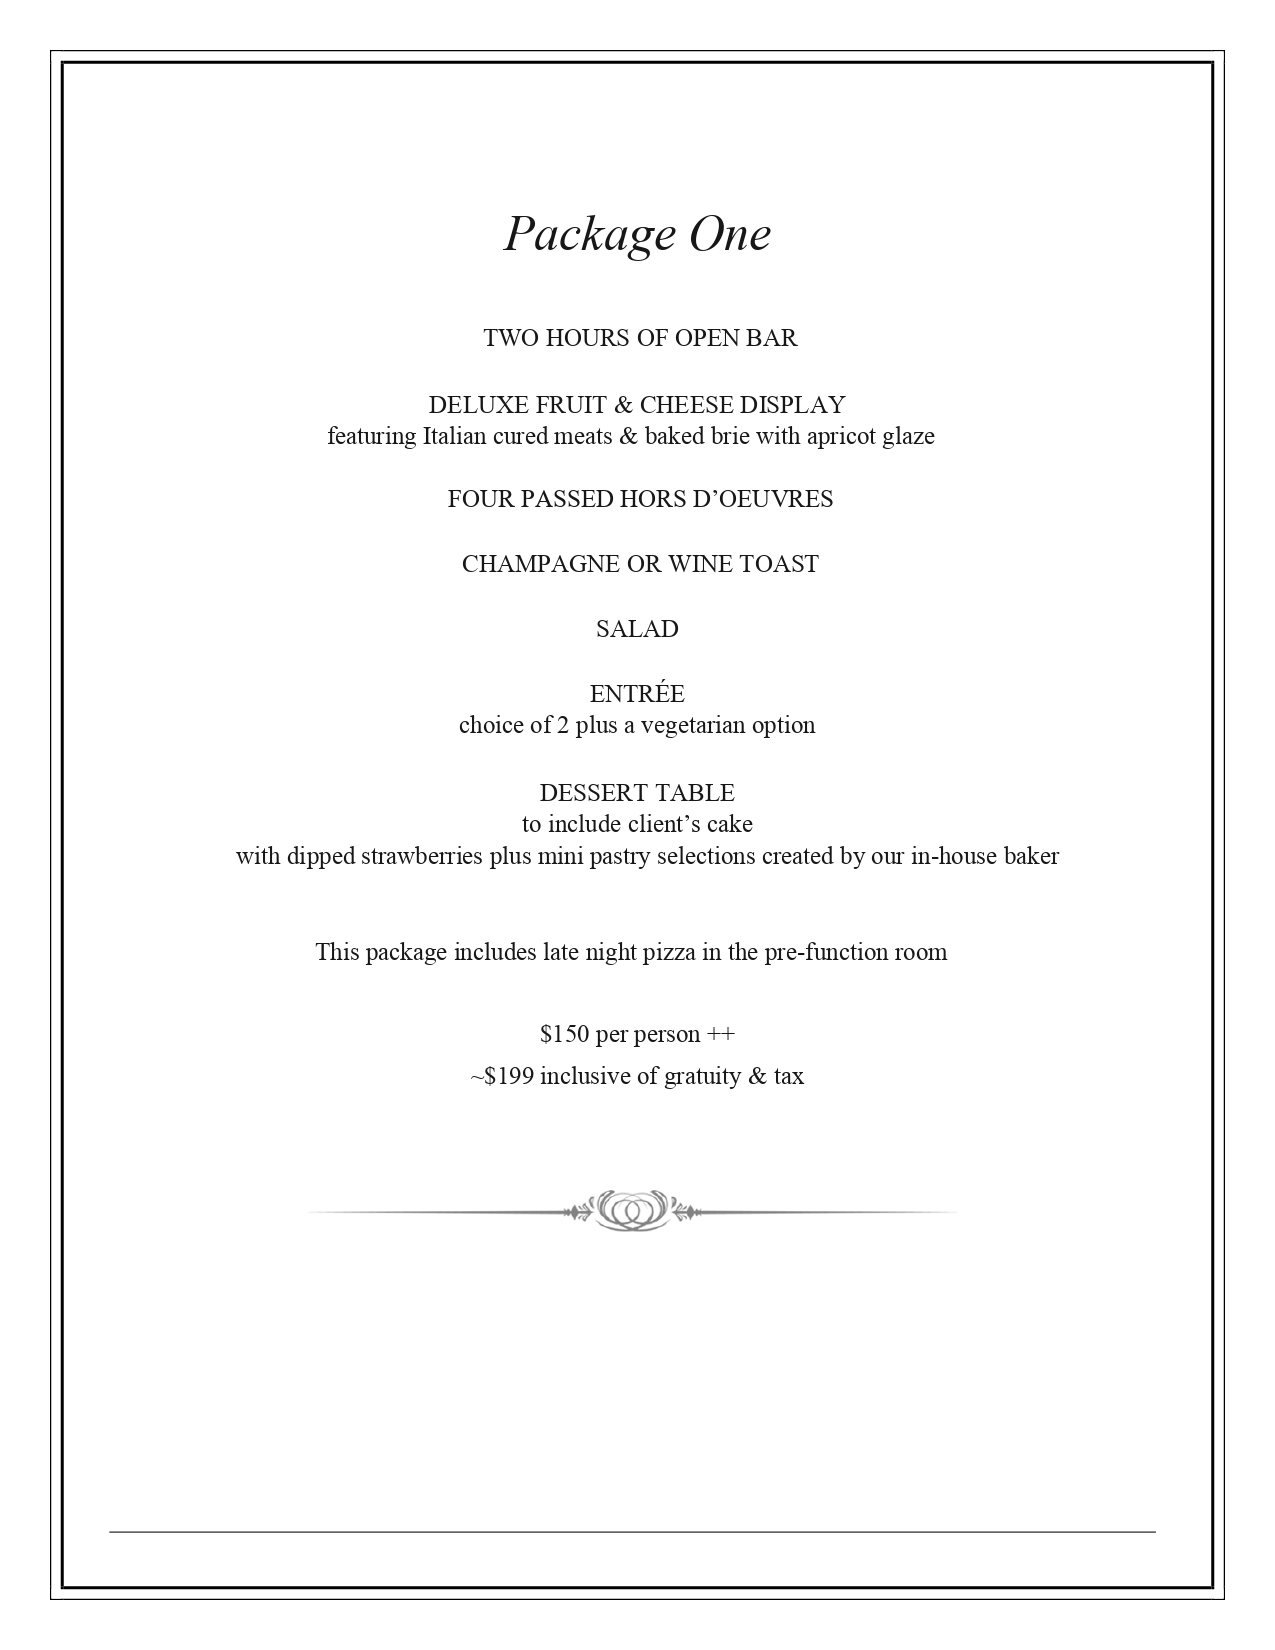 Wedding Packages 10.1.21_page-0003